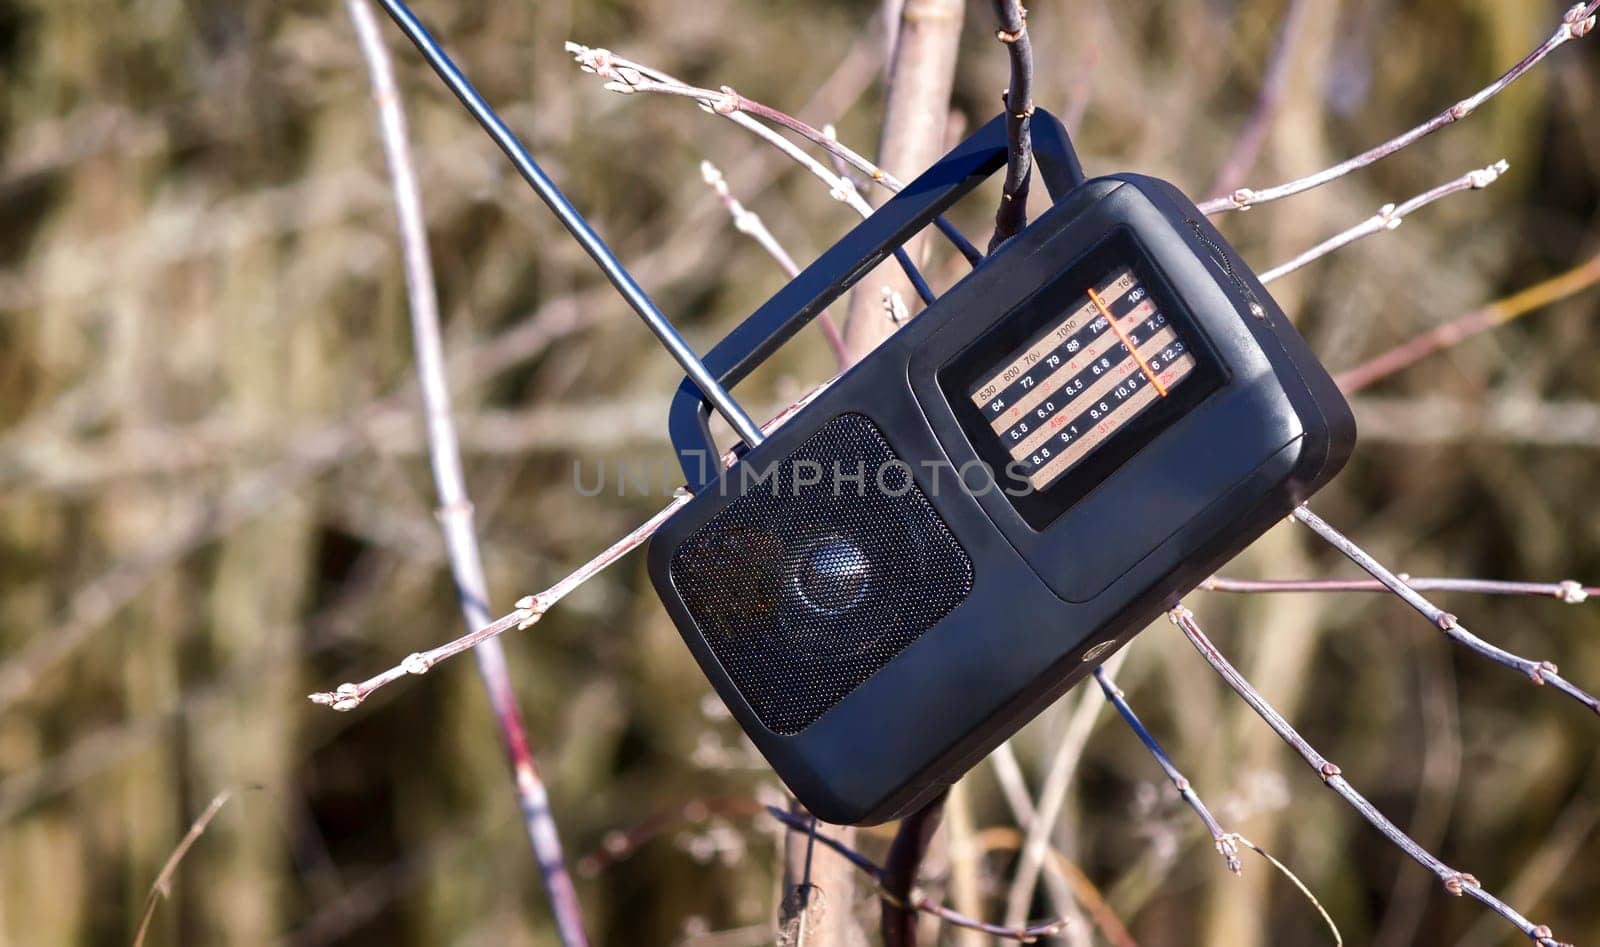 On the branches of the tree hangs a small radio on batteries during a picnic in the woods.